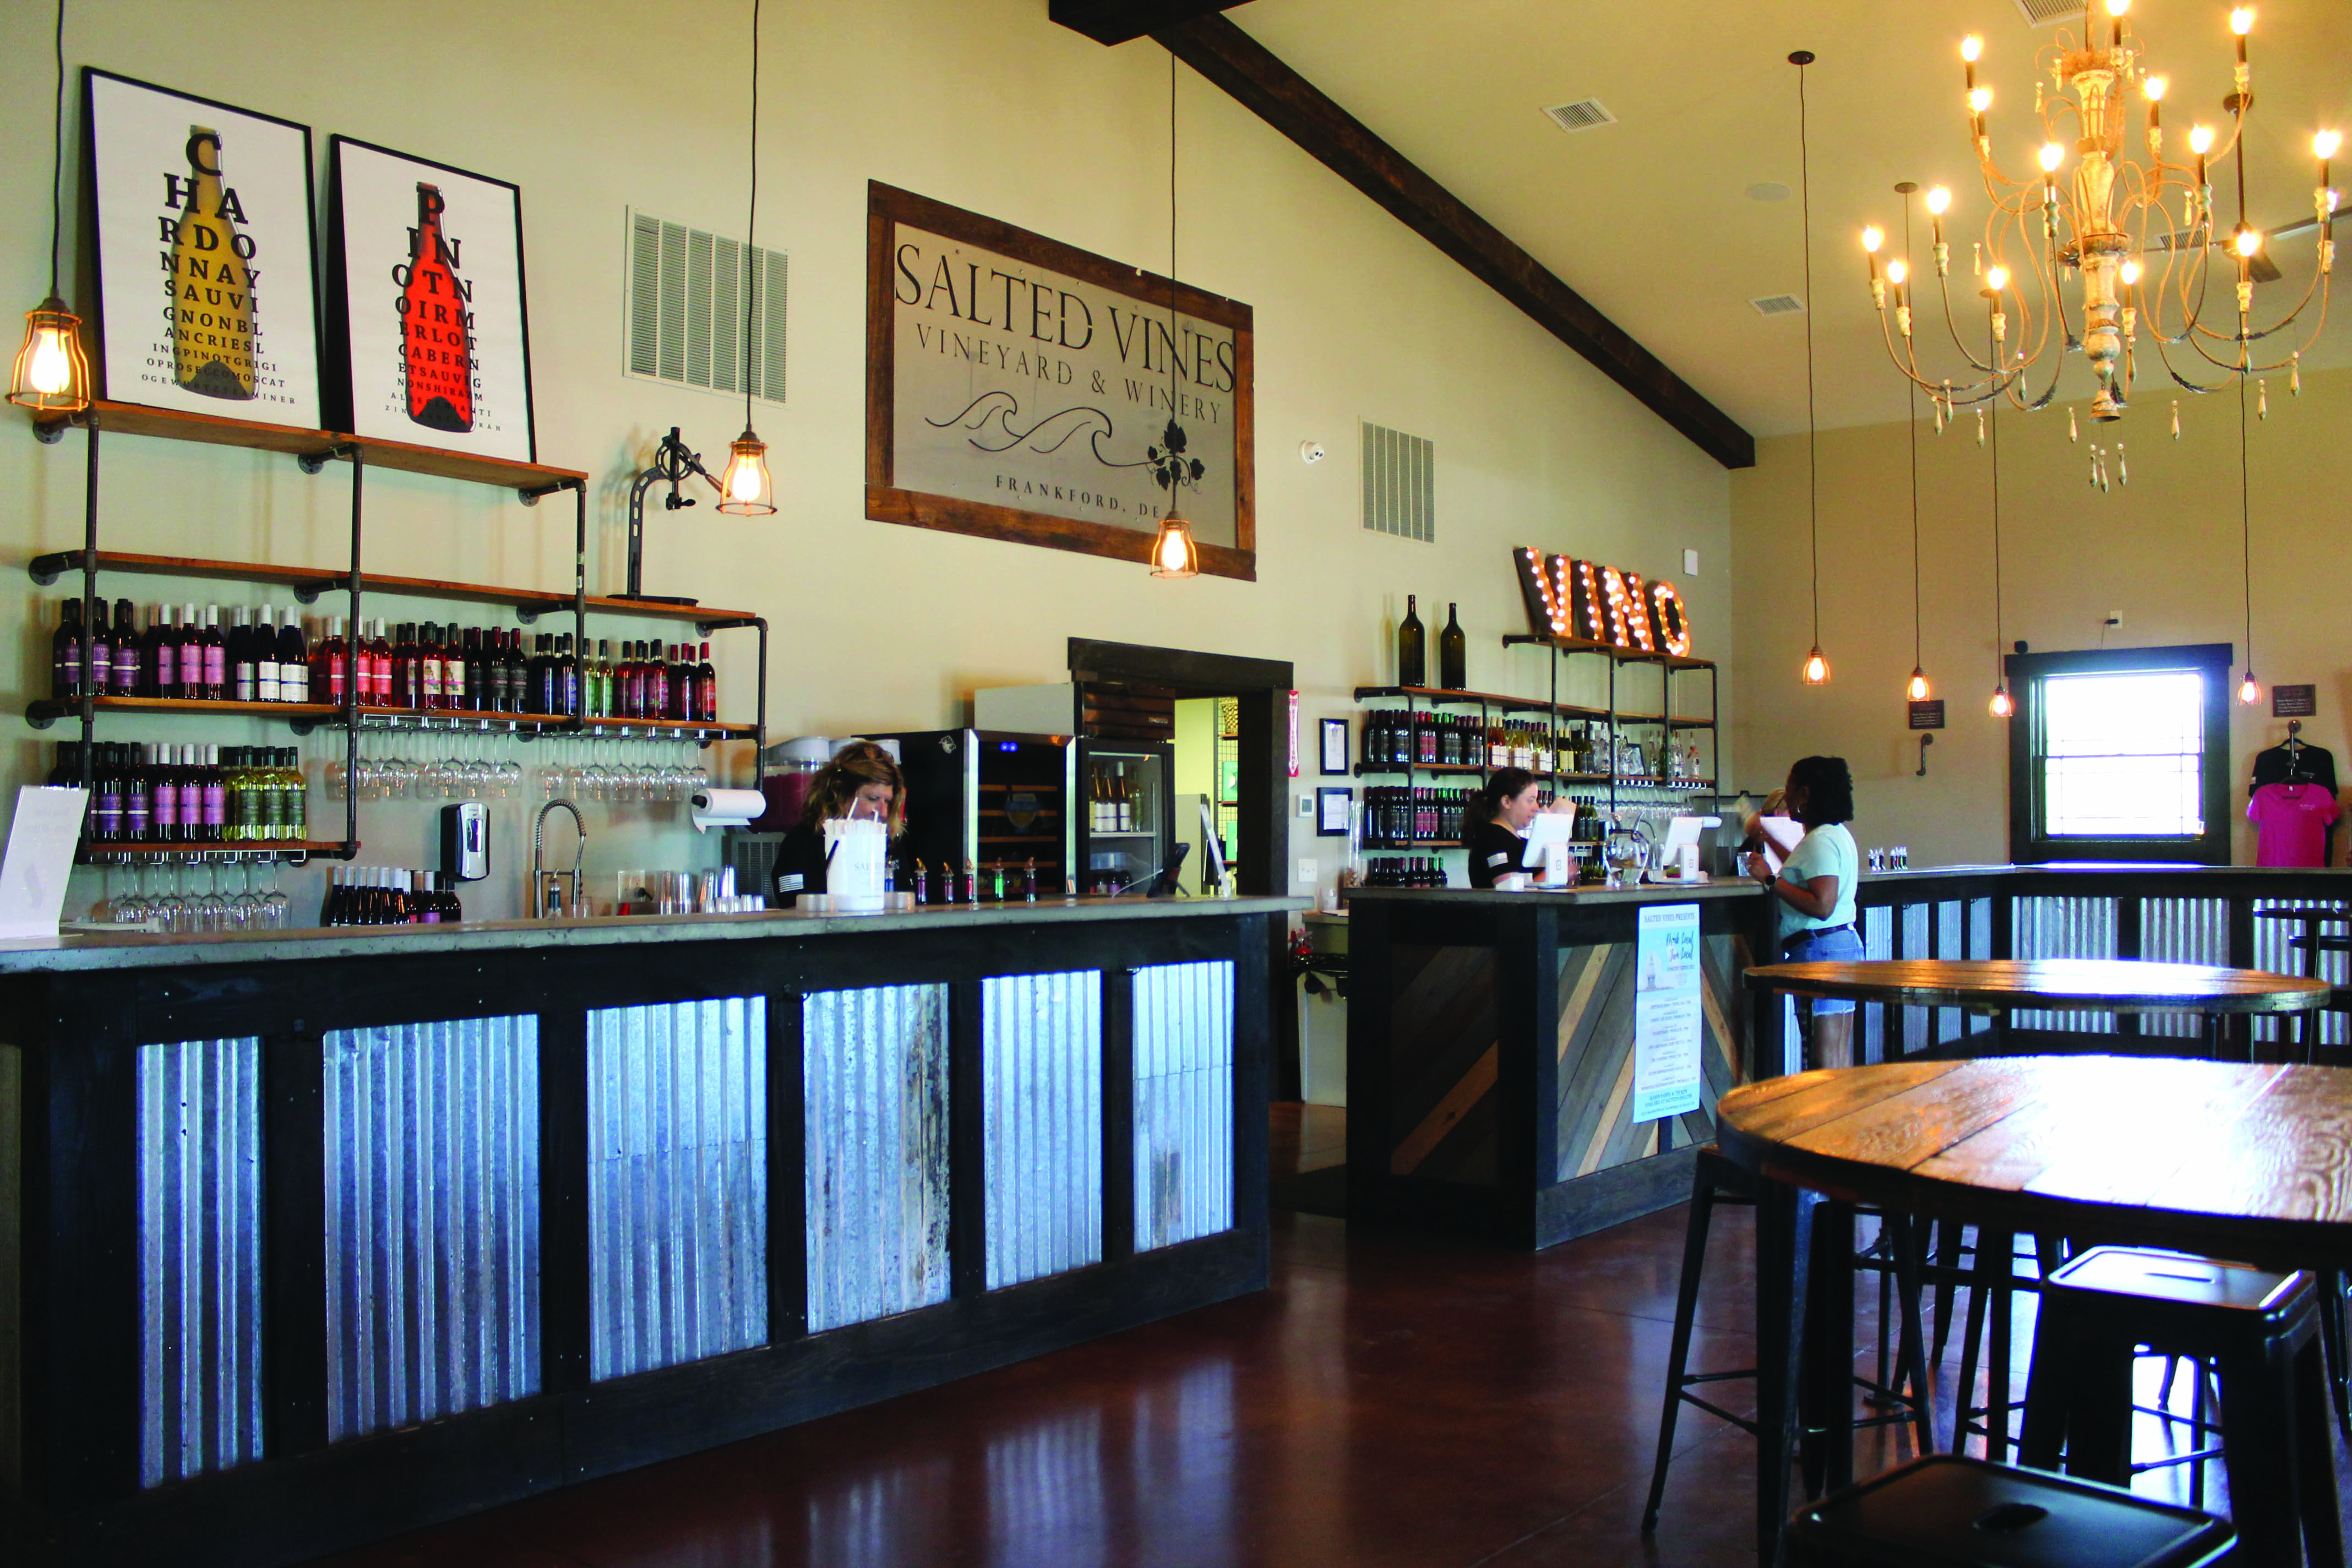 Visit Salted Vine's tasting room to sample the more than one dozen wines the winery has onsite. 